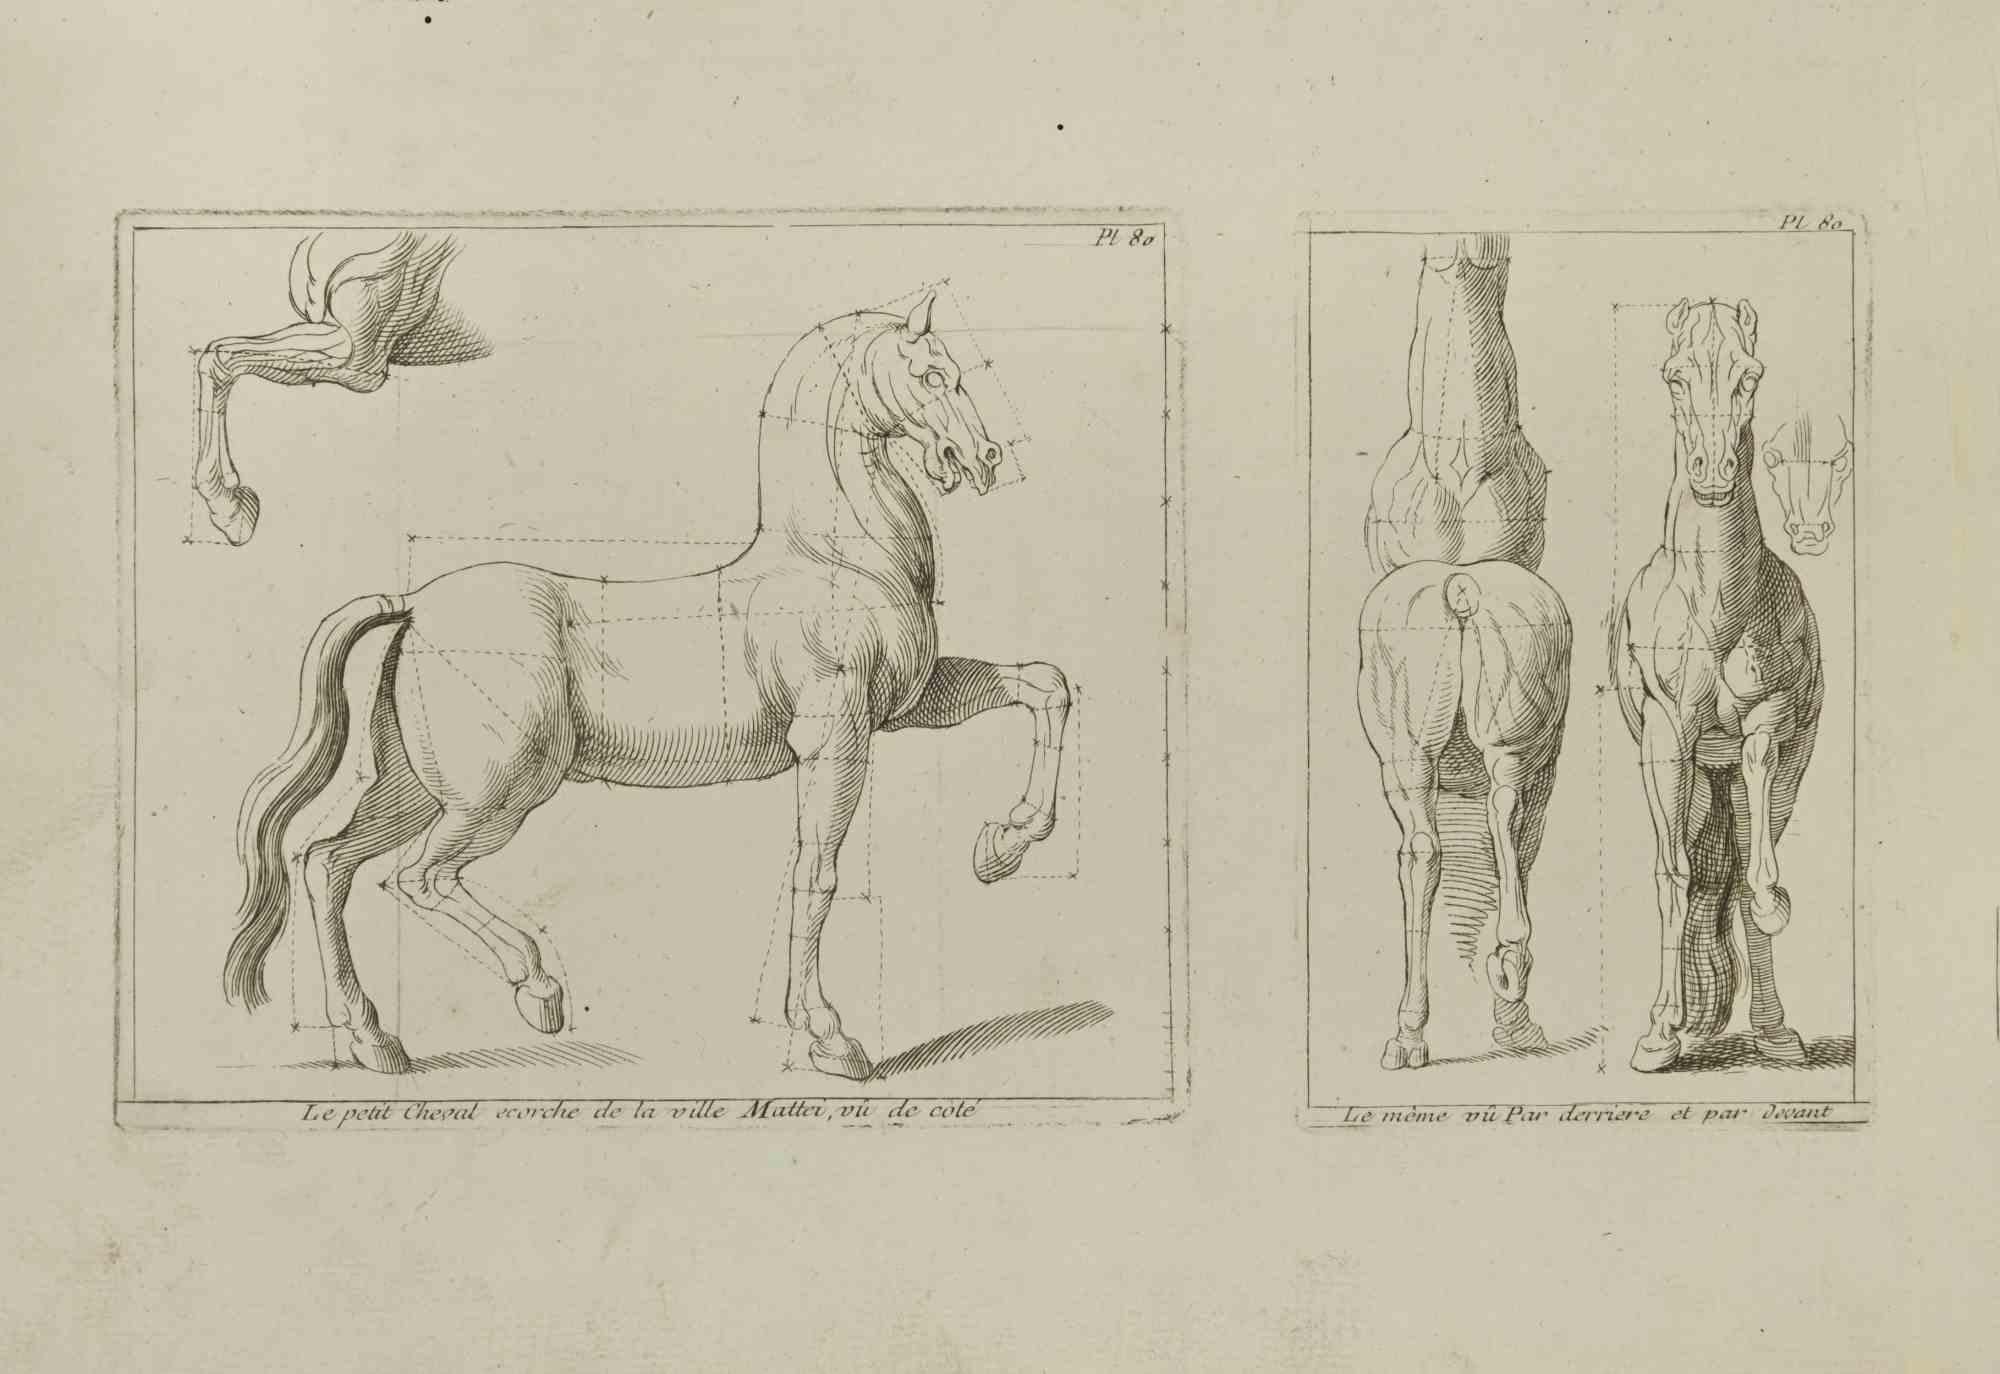 Study of Horse - Plate 80 is an etching realized by Jean François Poletnich in 18th Century.

Good conditions.

The artwork is depicted through confident strokes.